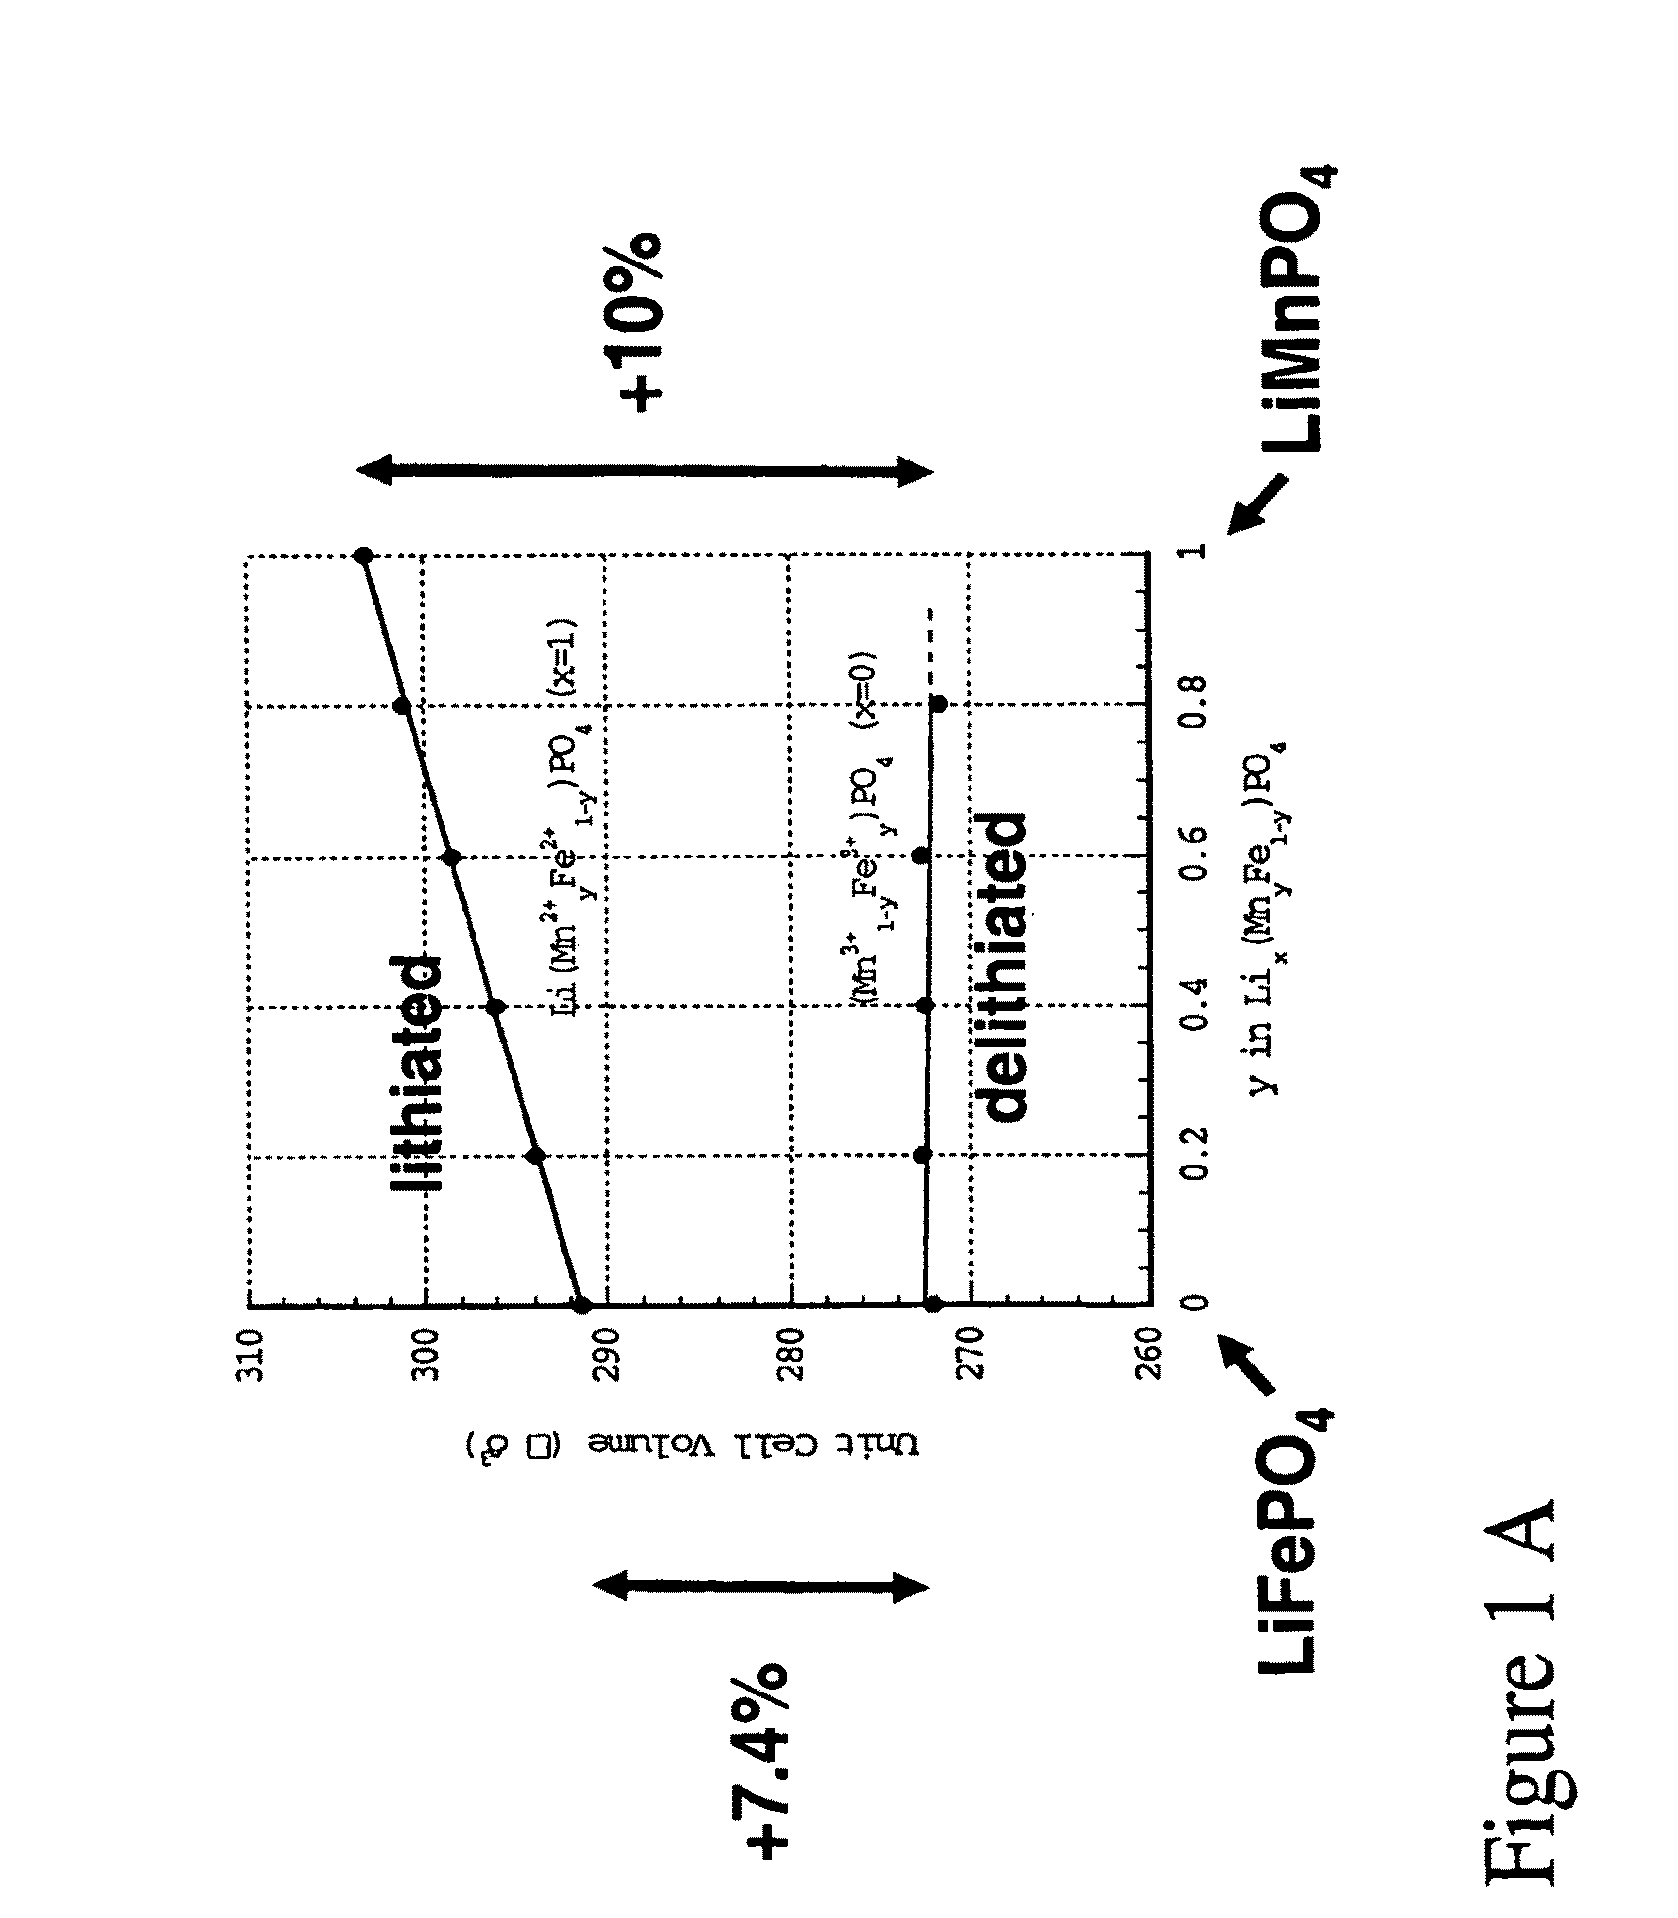 Electrochemical methods, devices, and structures